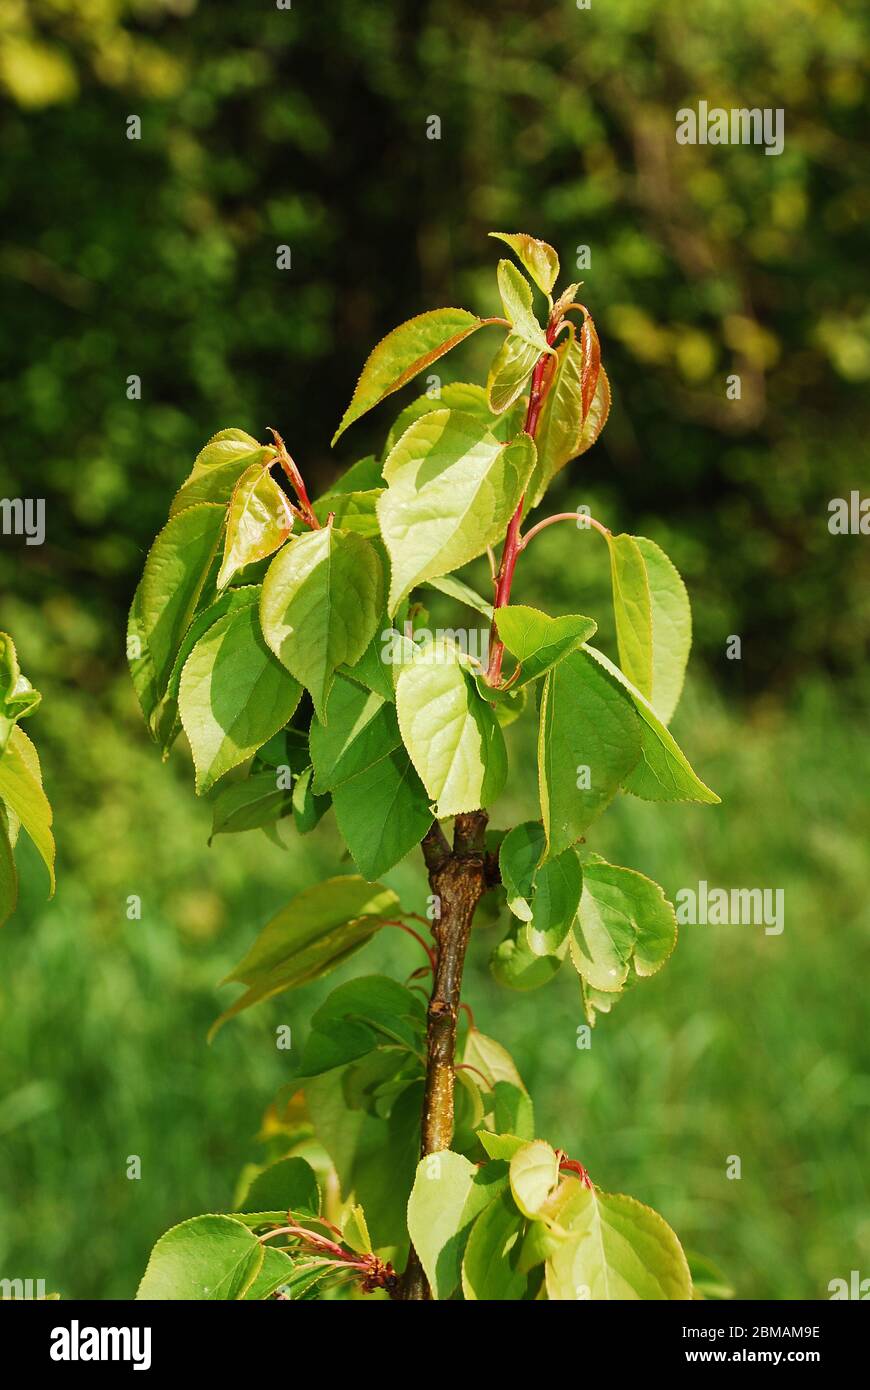 The Young Leaves Growing On An Apricot Tree Italian Variety Precoce Cremonini Also Known As Precoce D Imola In Spring Mid April Stock Photo Alamy